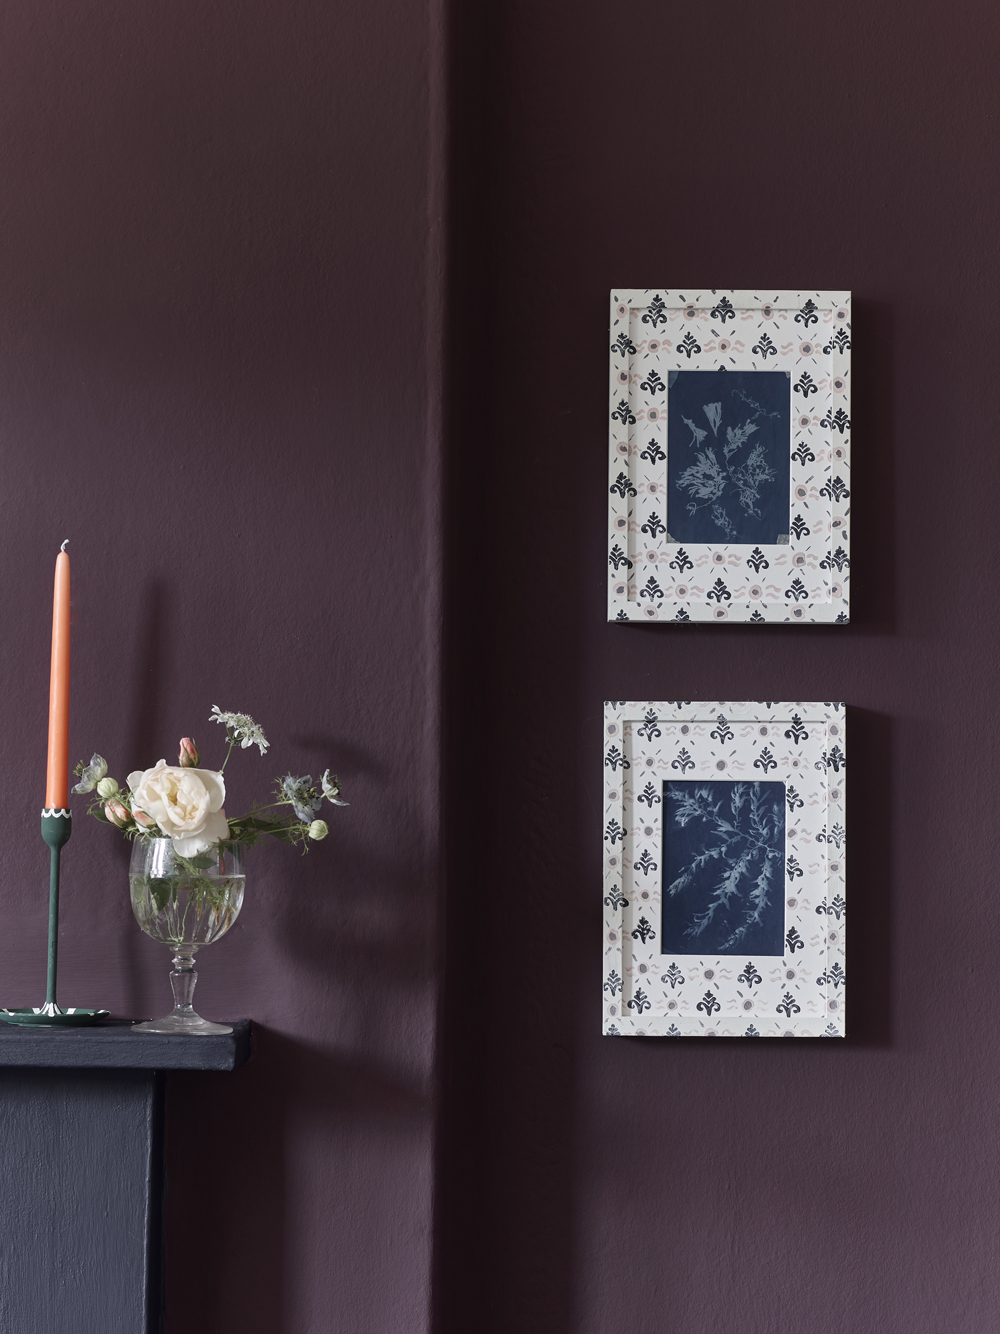 Close Up of Annie Sloan Tyrian Plum Wall Paint and Decorative Illustration Frames